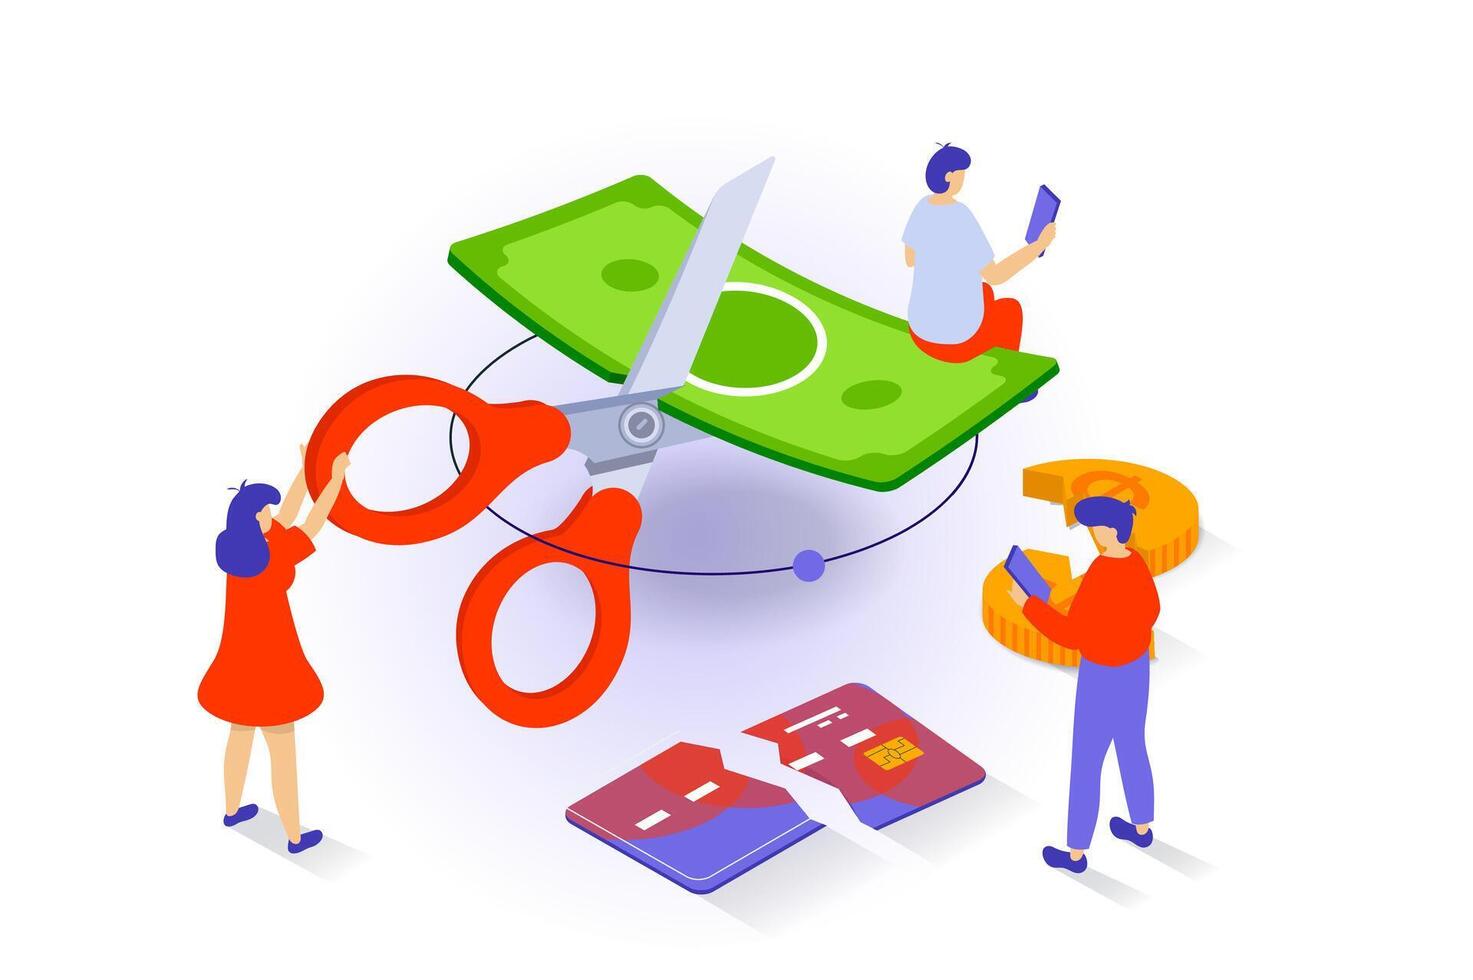 Unemployment and crisis concept in 3d isometric design. People have financial problems and debts, cut cash with scissors and break credit card. Vector illustration with isometry scene for web graphic